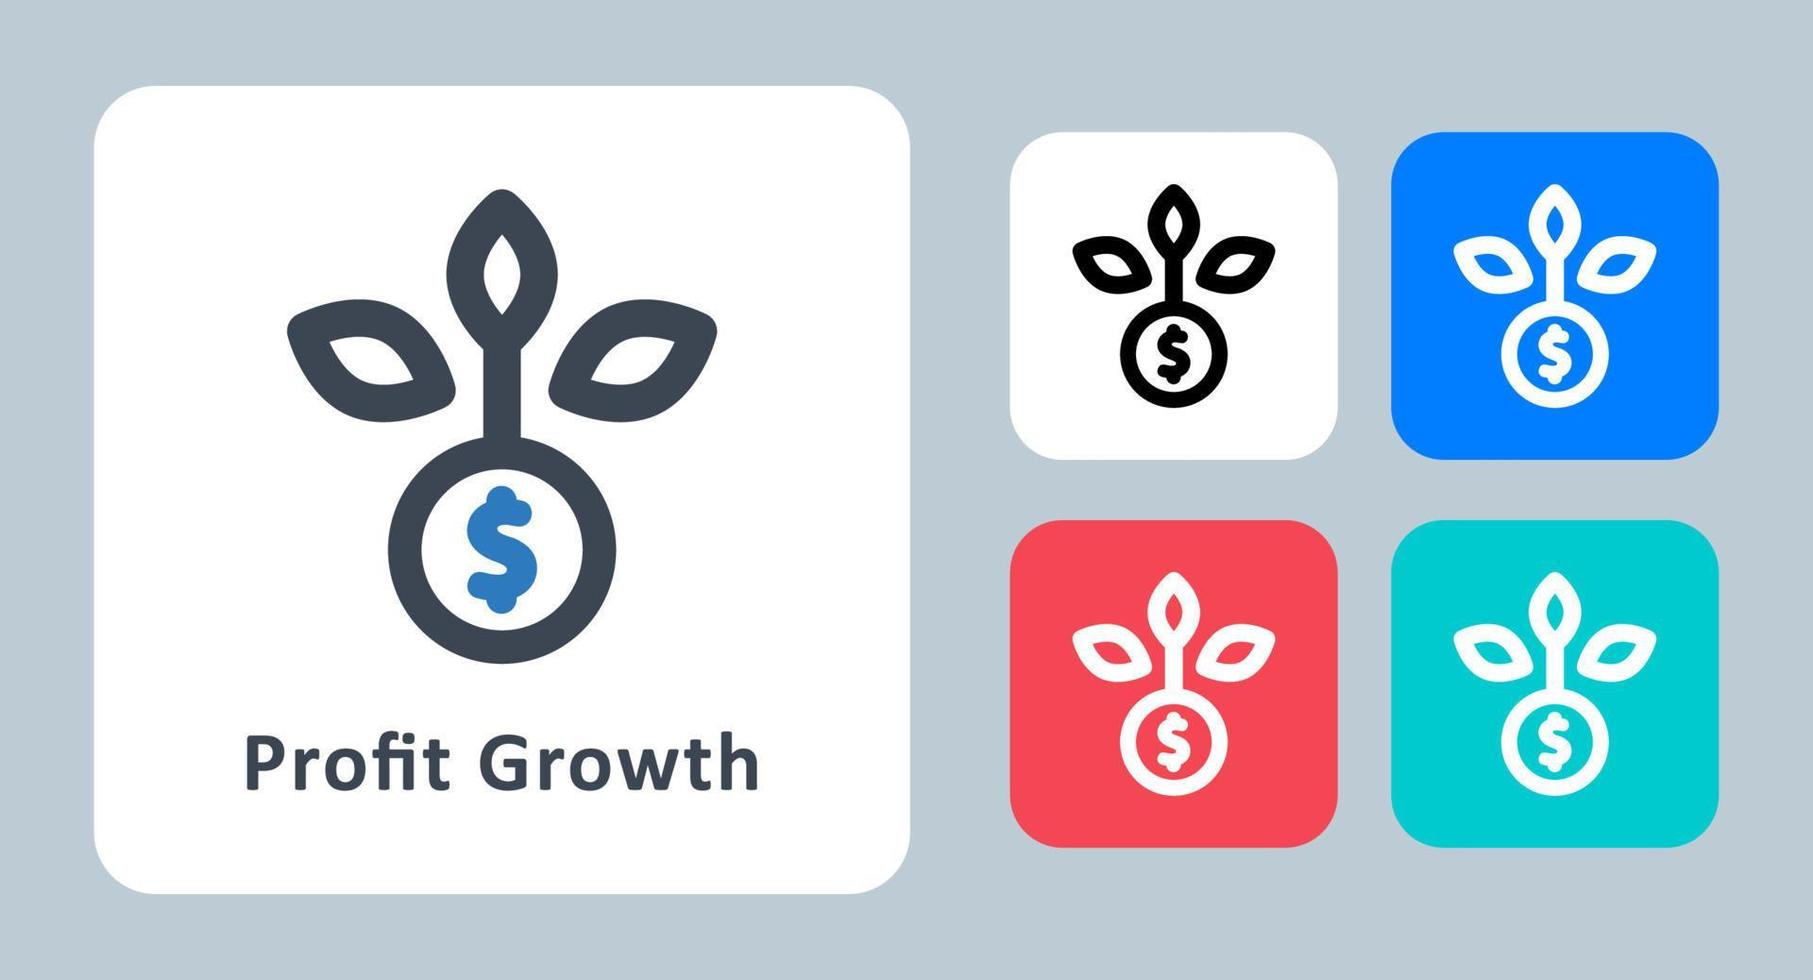 Profit Growth icon - vector illustration . Investment, Finance, Money, Business, Profit, Growth, Growing, line, outline, flat, icons .